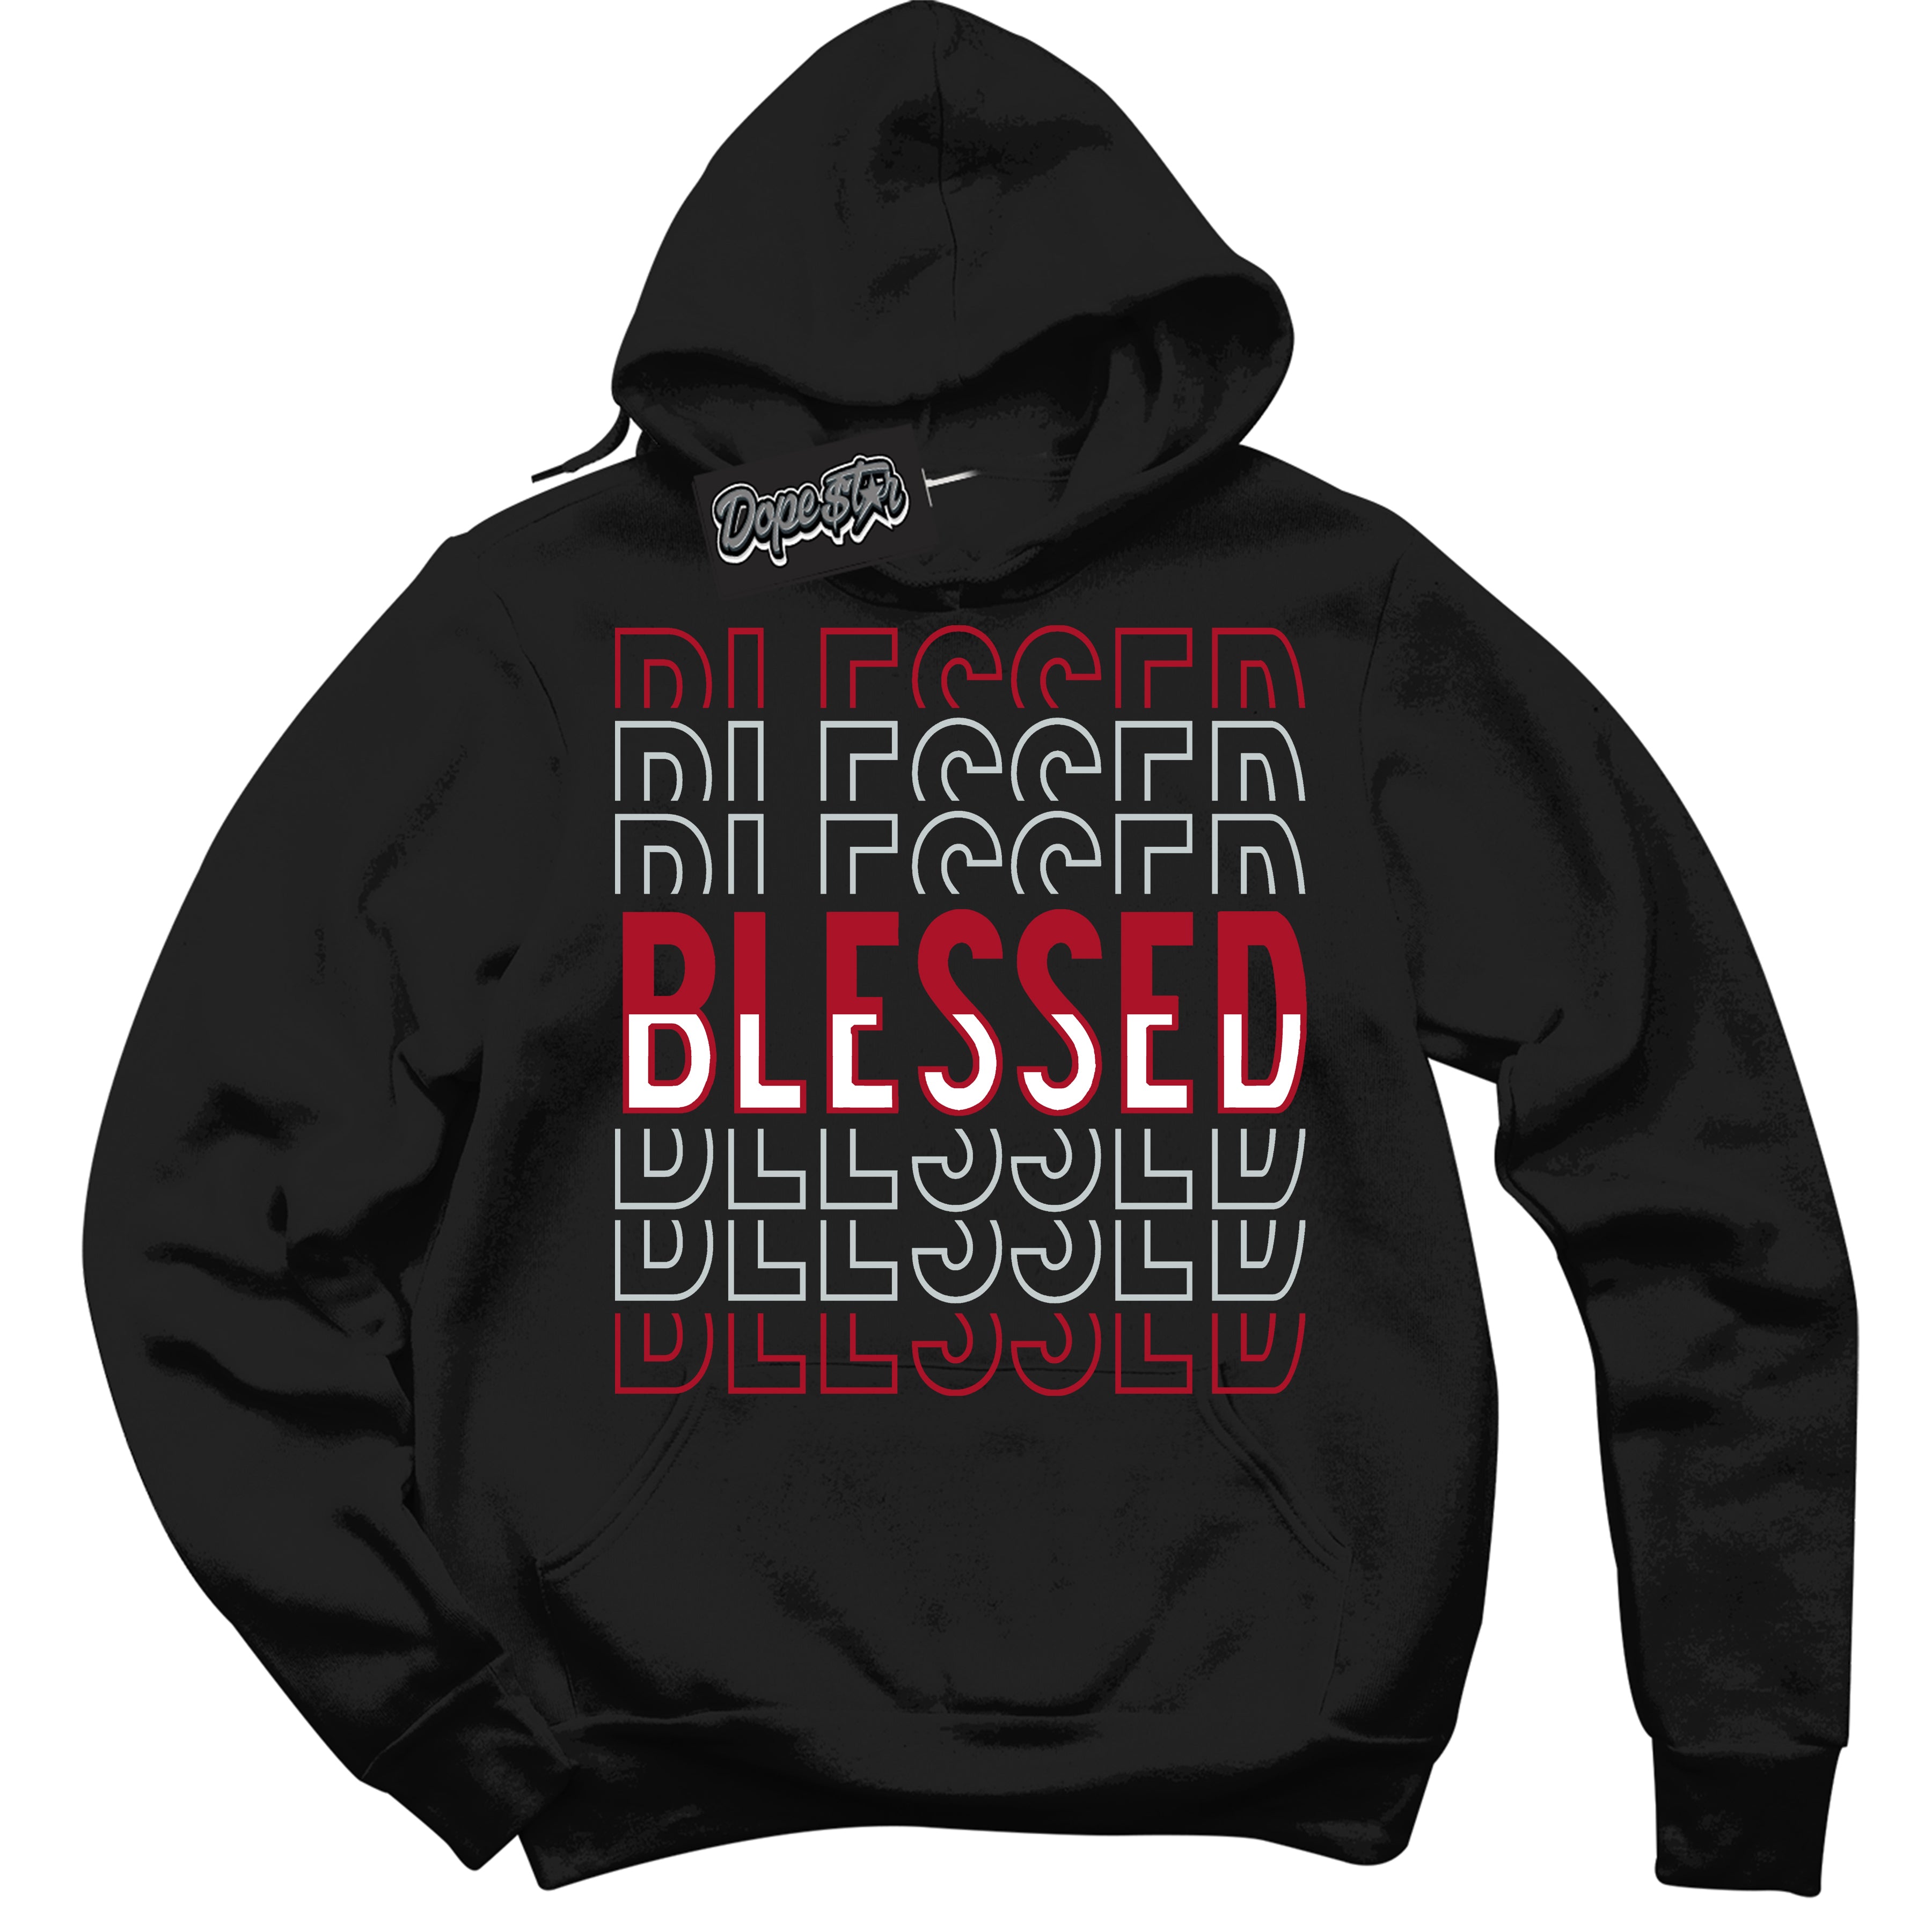 Cool Black Hoodie with “ Blessed Stacked ”  design that Perfectly Matches  Reverse Ultraman Sneakers.